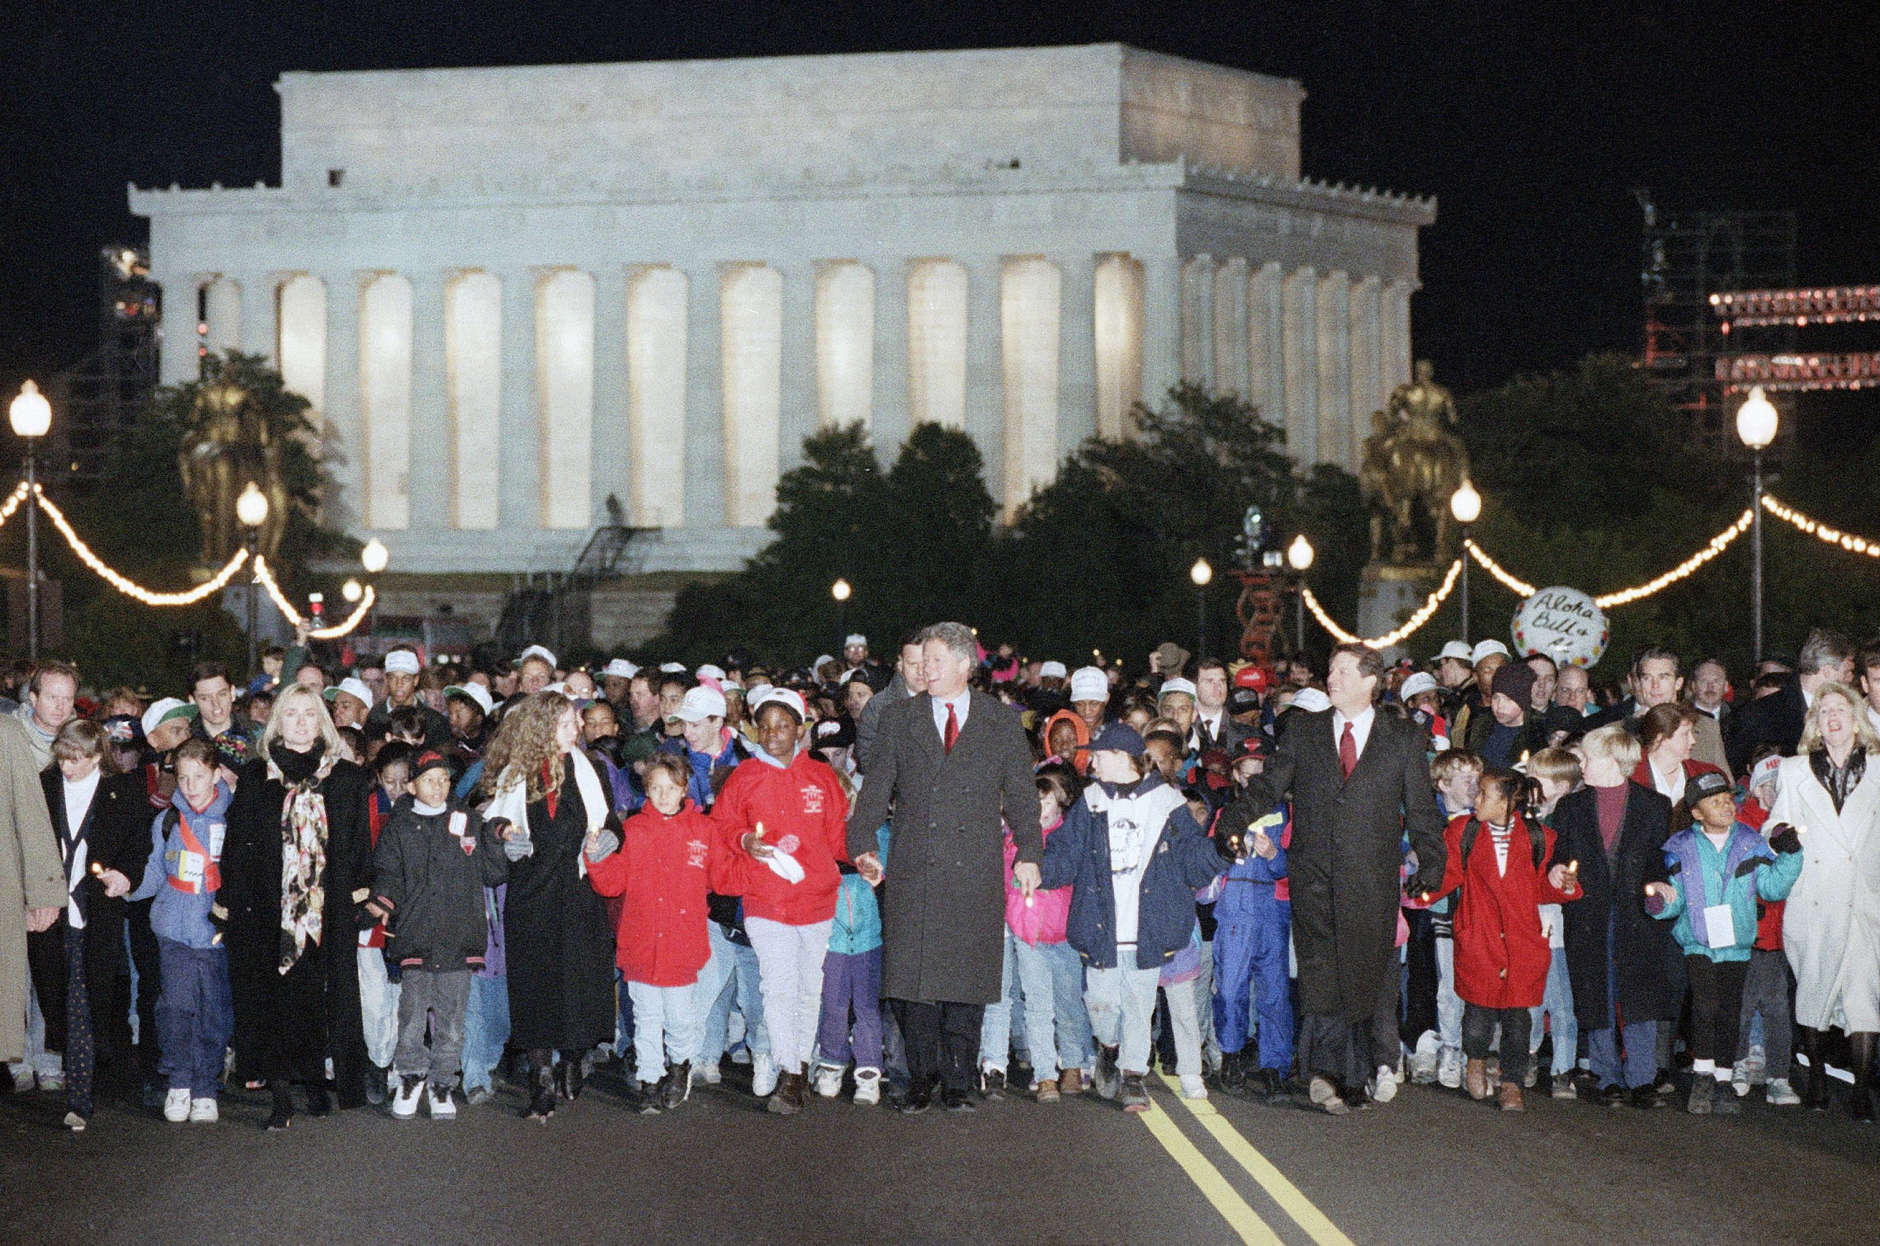 President-elect Bill Clinton, center, joins hands with others as he crosses the Memorial Bridge, built to symbolize the reunion of  North and South after the Civil War, Sunday, Jan. 17, 1993, Washington, D.C. During the inaugural festivities Clinton told those gathered we must go forward to get here or not at all and to reach out beyond the forces that divide us. (AP Photo/Greg Gibson)